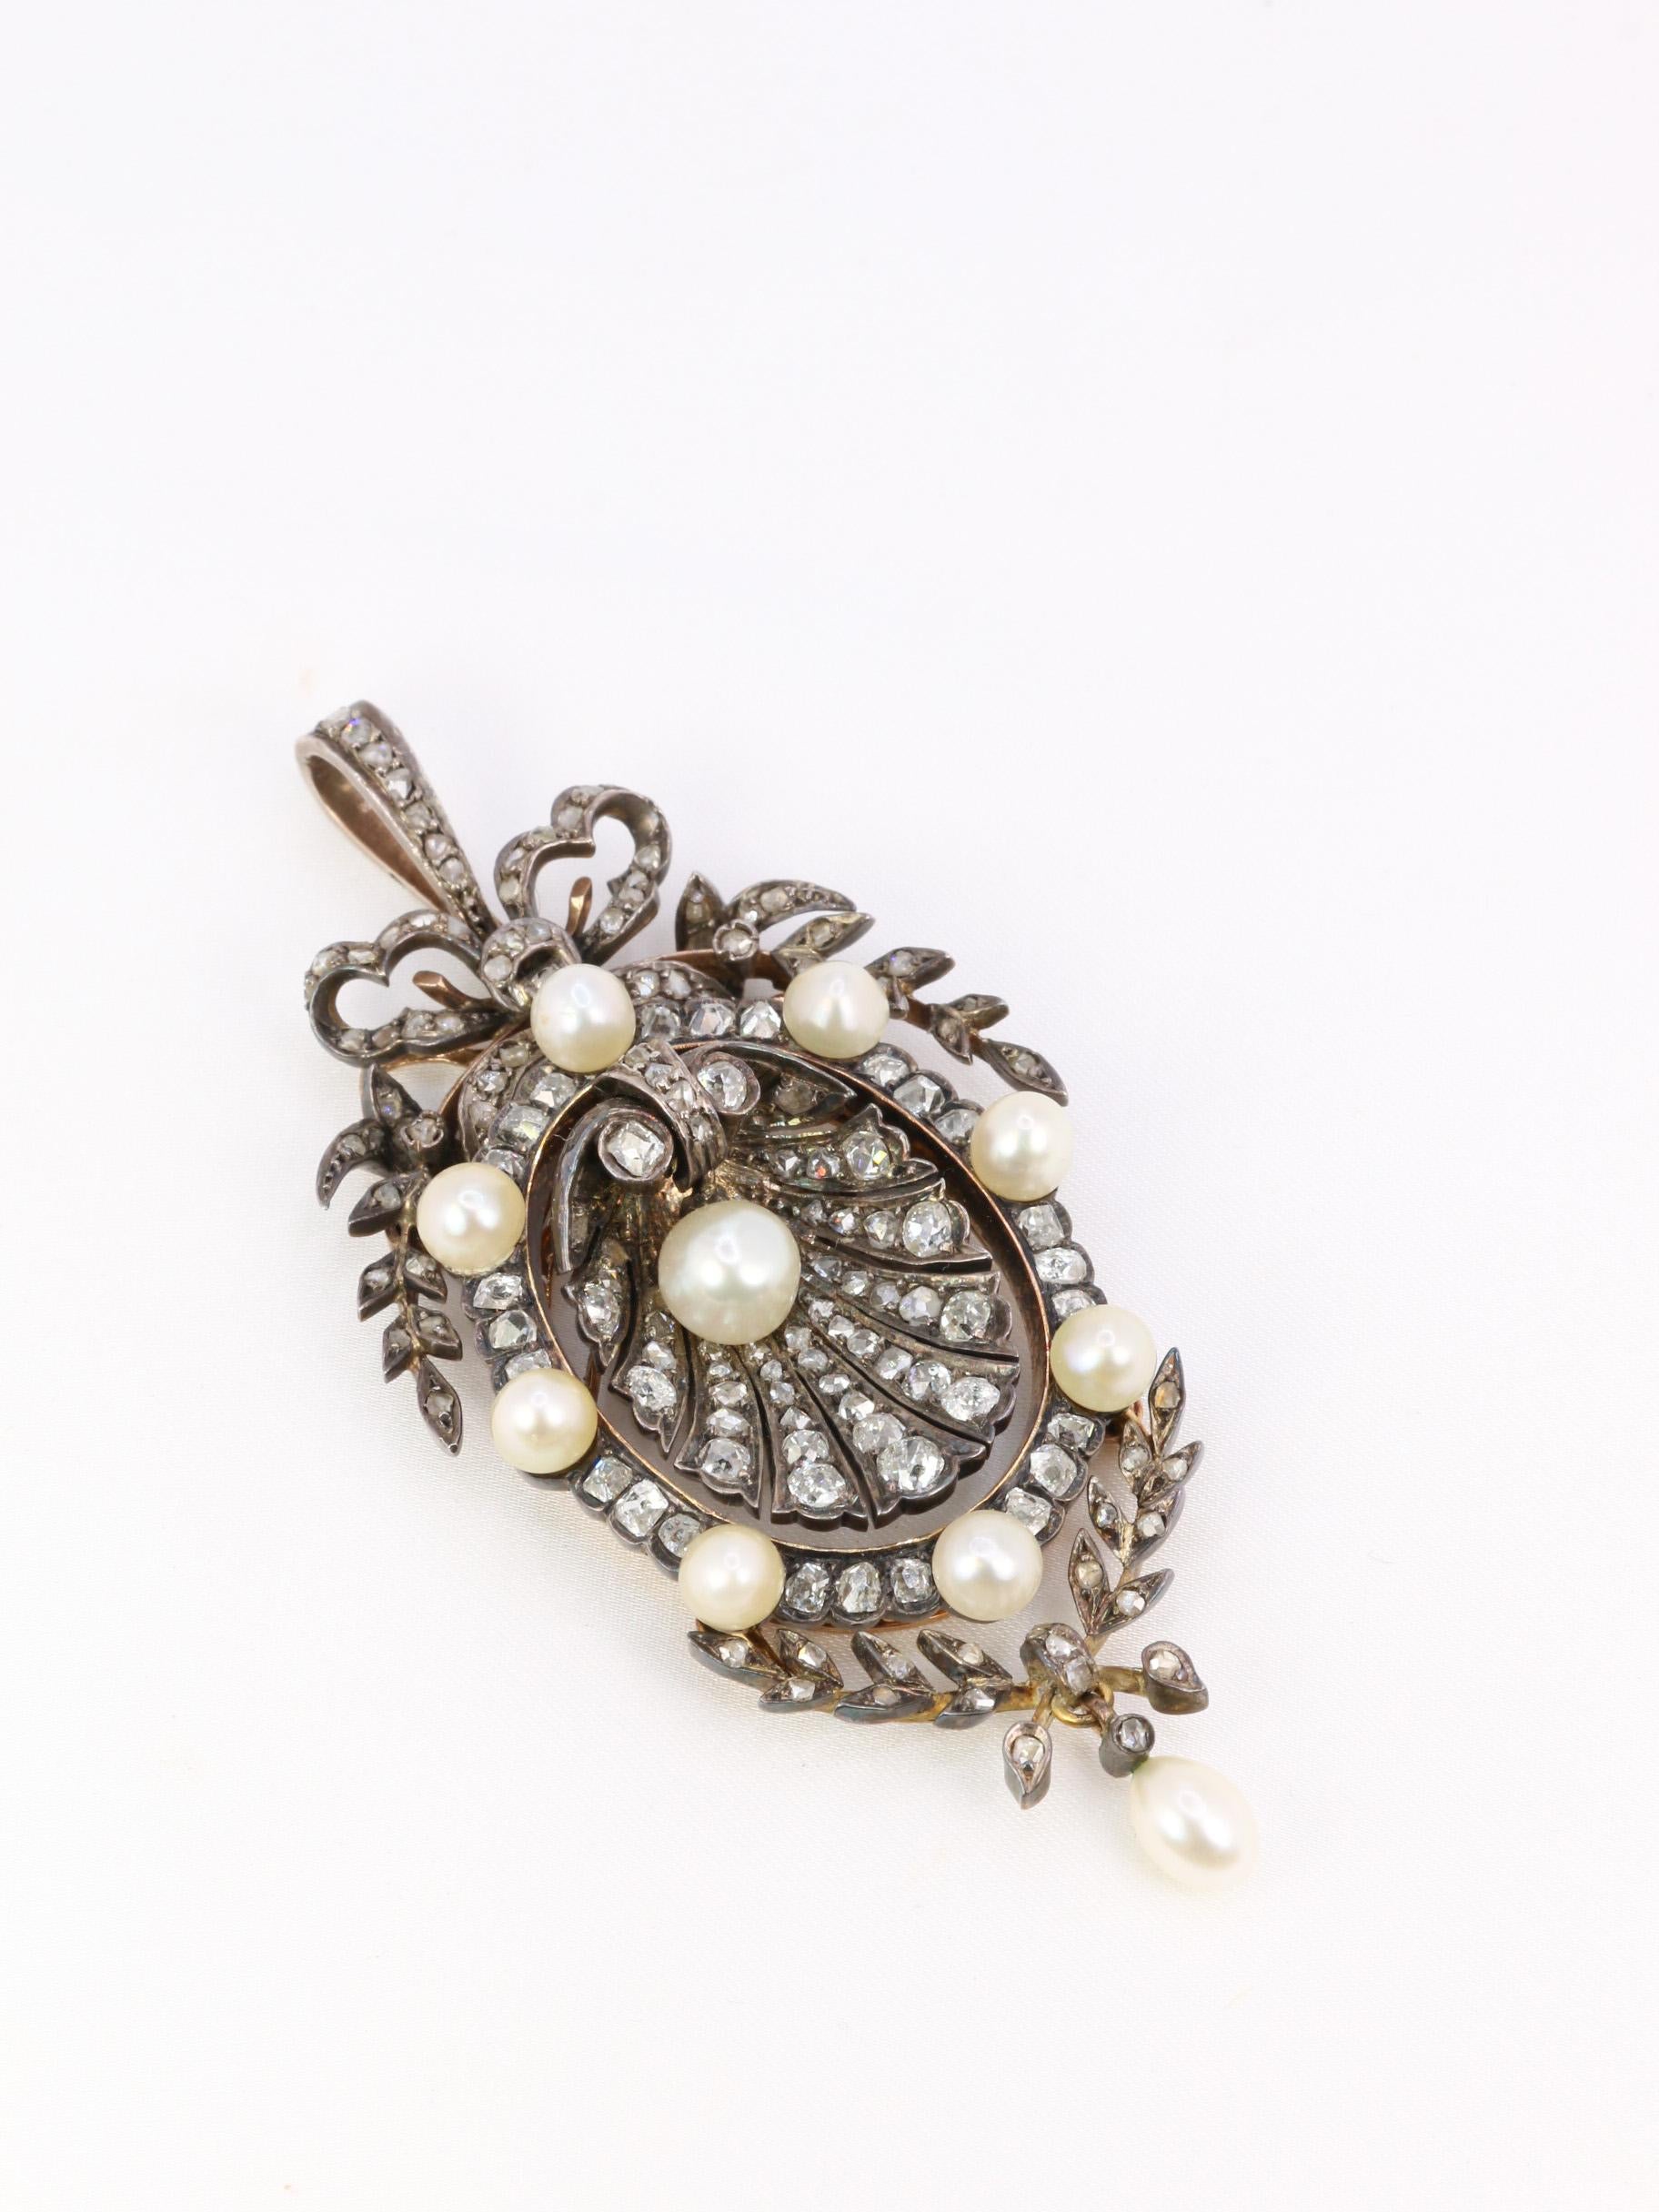 Oval pendant-brooch in 18k (750°/°°) gold, silver and natural pearls featuring a shell. 
The centerpiece is set with a 6.5 mm calibrated mobile button pearl and falling old mine cut and rose-cut diamonds. The shell-shaped central motif is surrounded